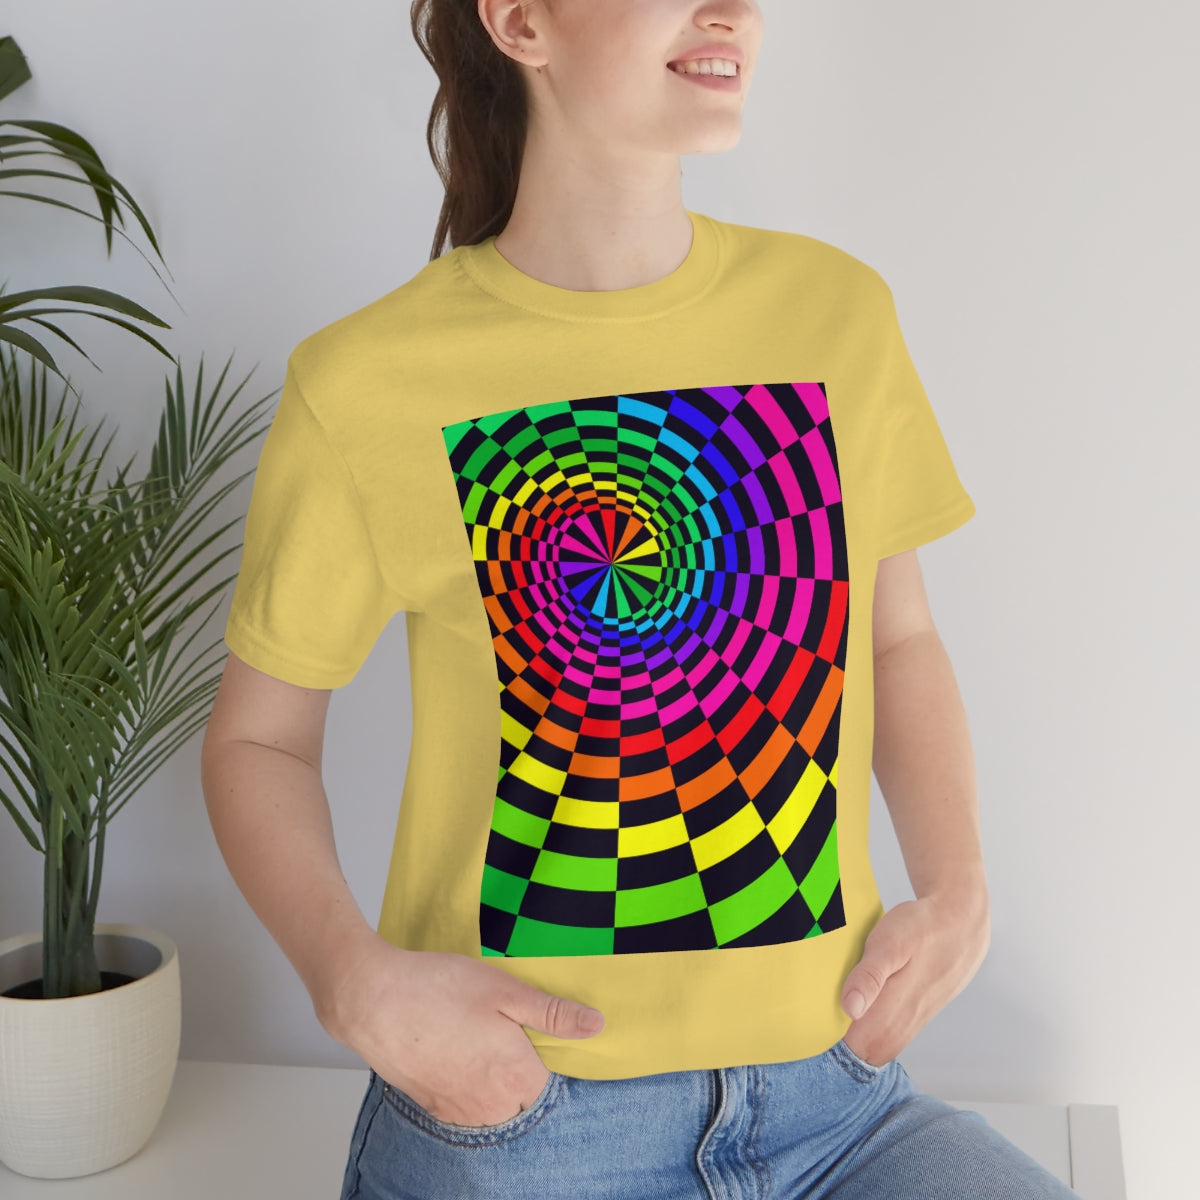 Unisex Jersey Short Sleeve Tee "Optical illusion Black Spirals of the Rectangles"